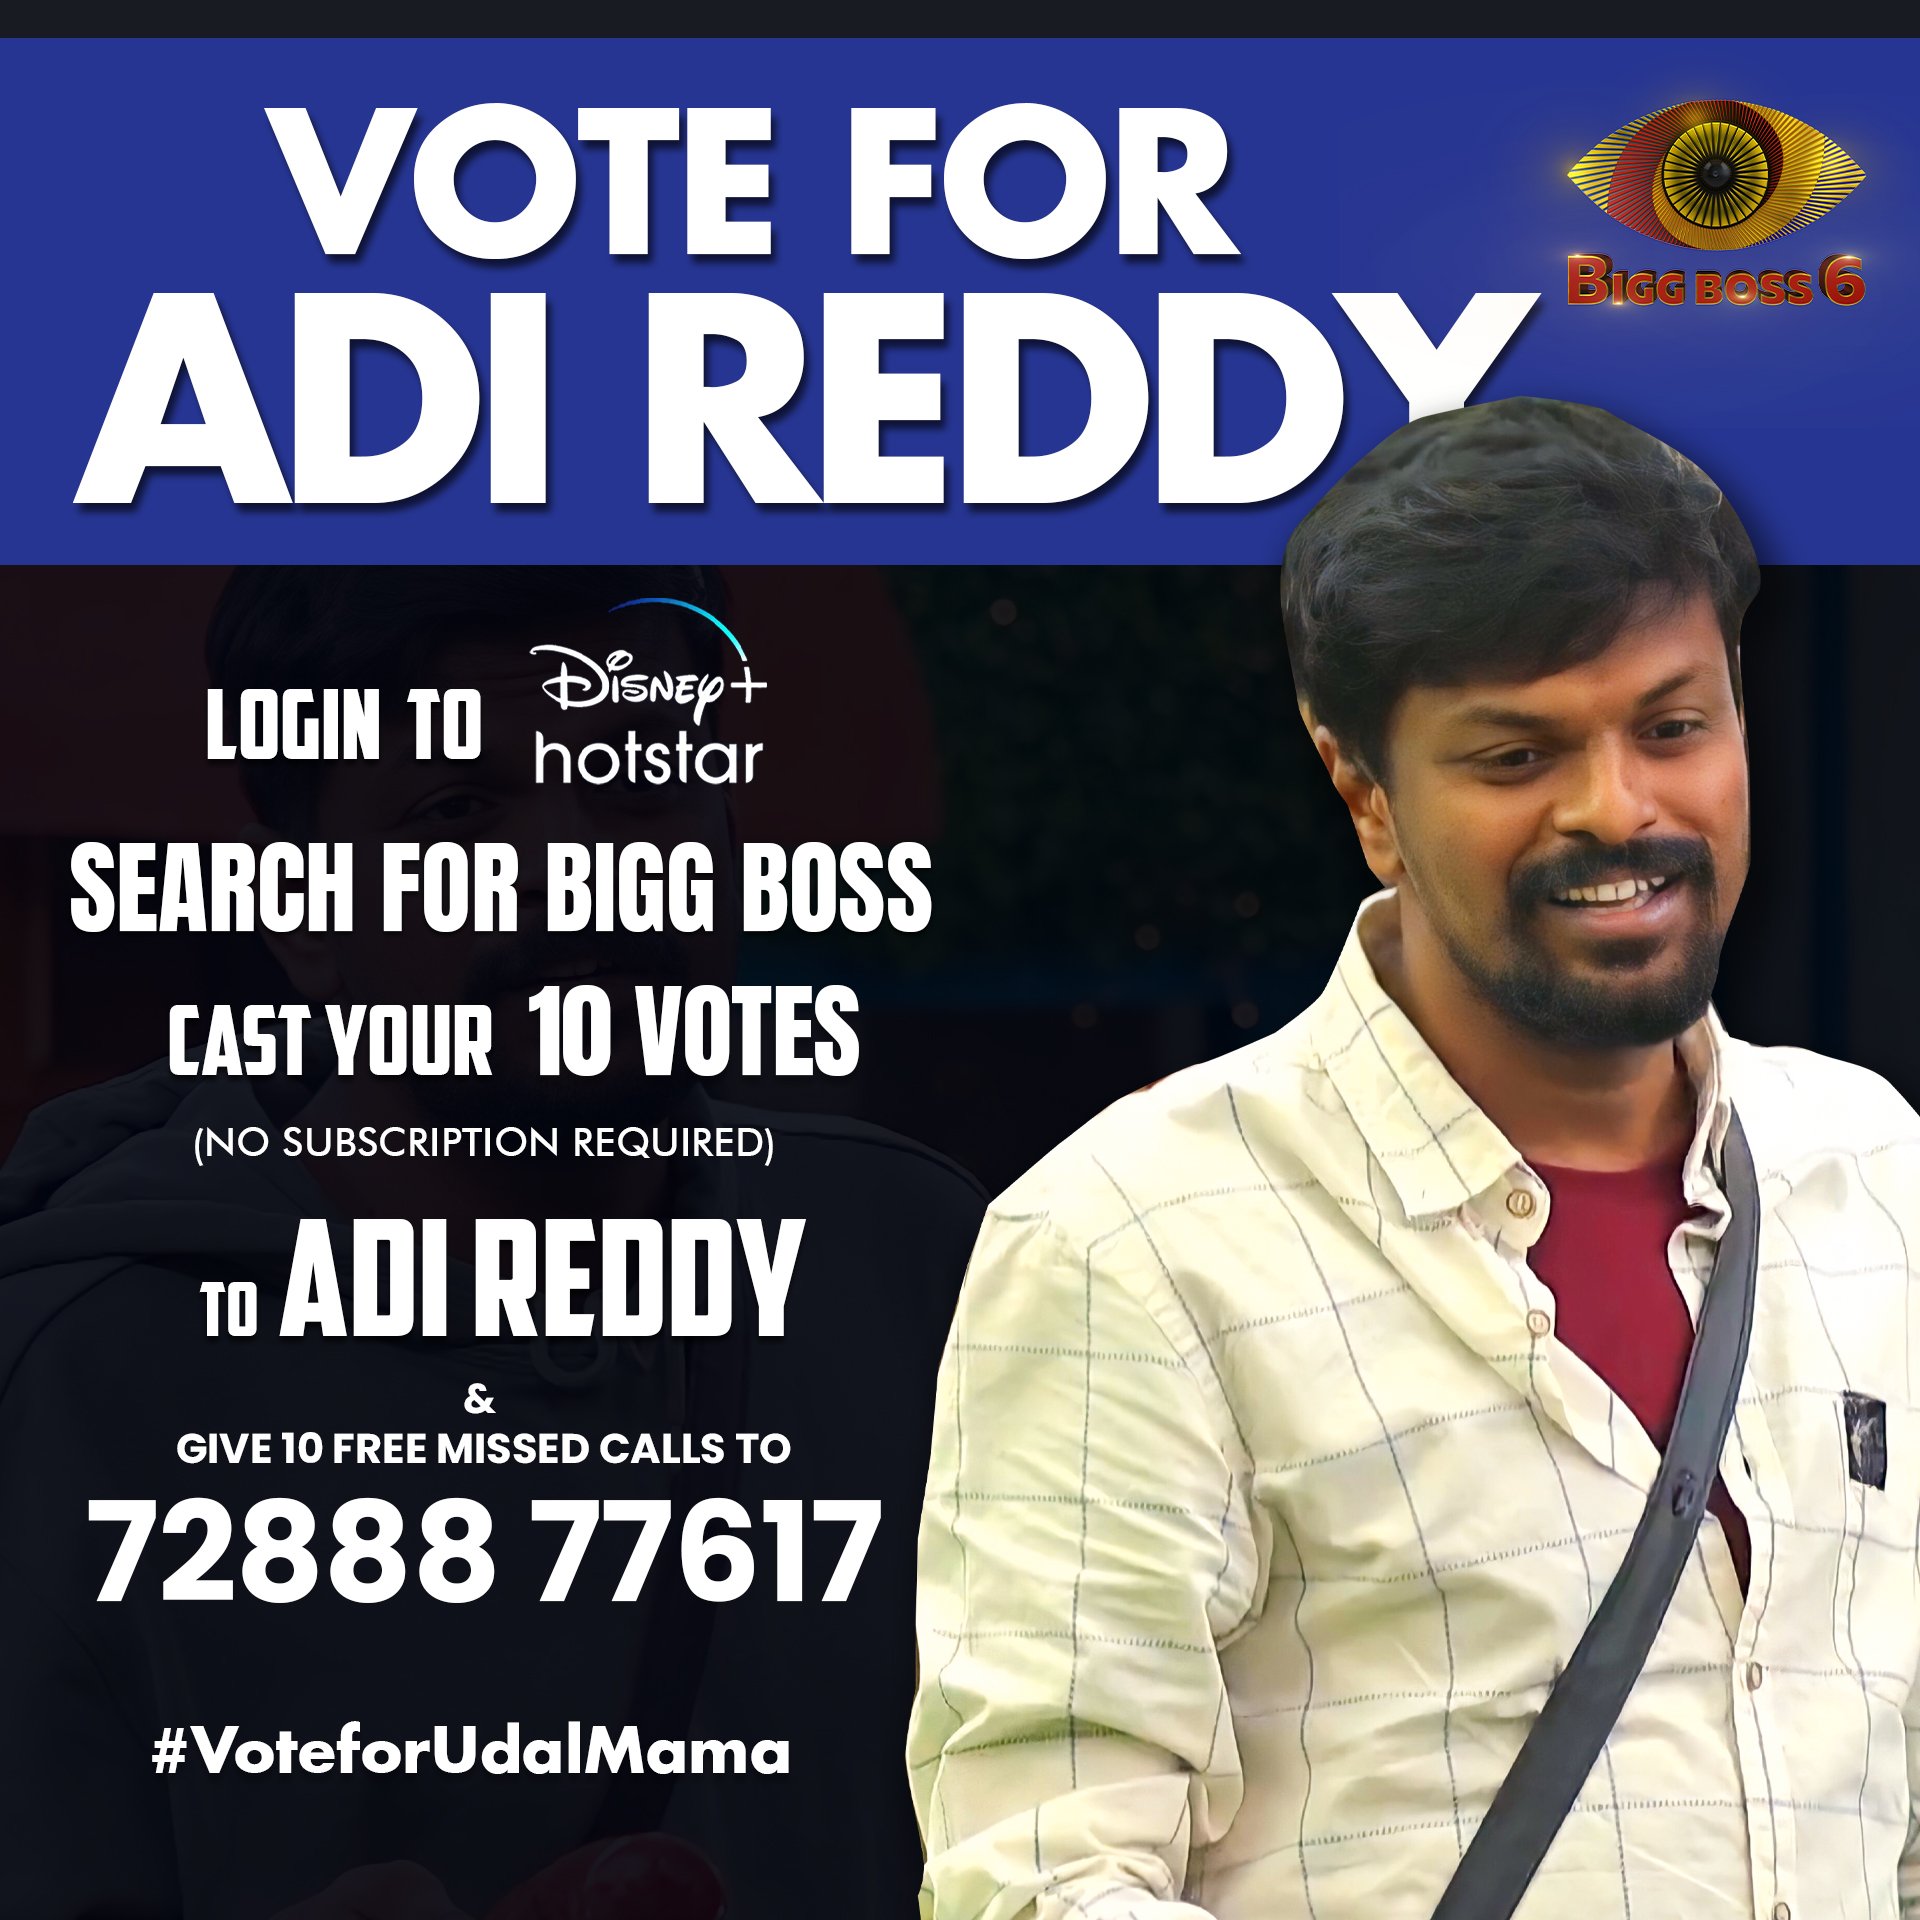 Adi Reddy Twitter: "Last day of voting Please vote for #Adi Reddy Login Disney Hotstar SEARCH FOR BIGG BOSS Cast your 10 Votes to Adi Reddy Give 10 free